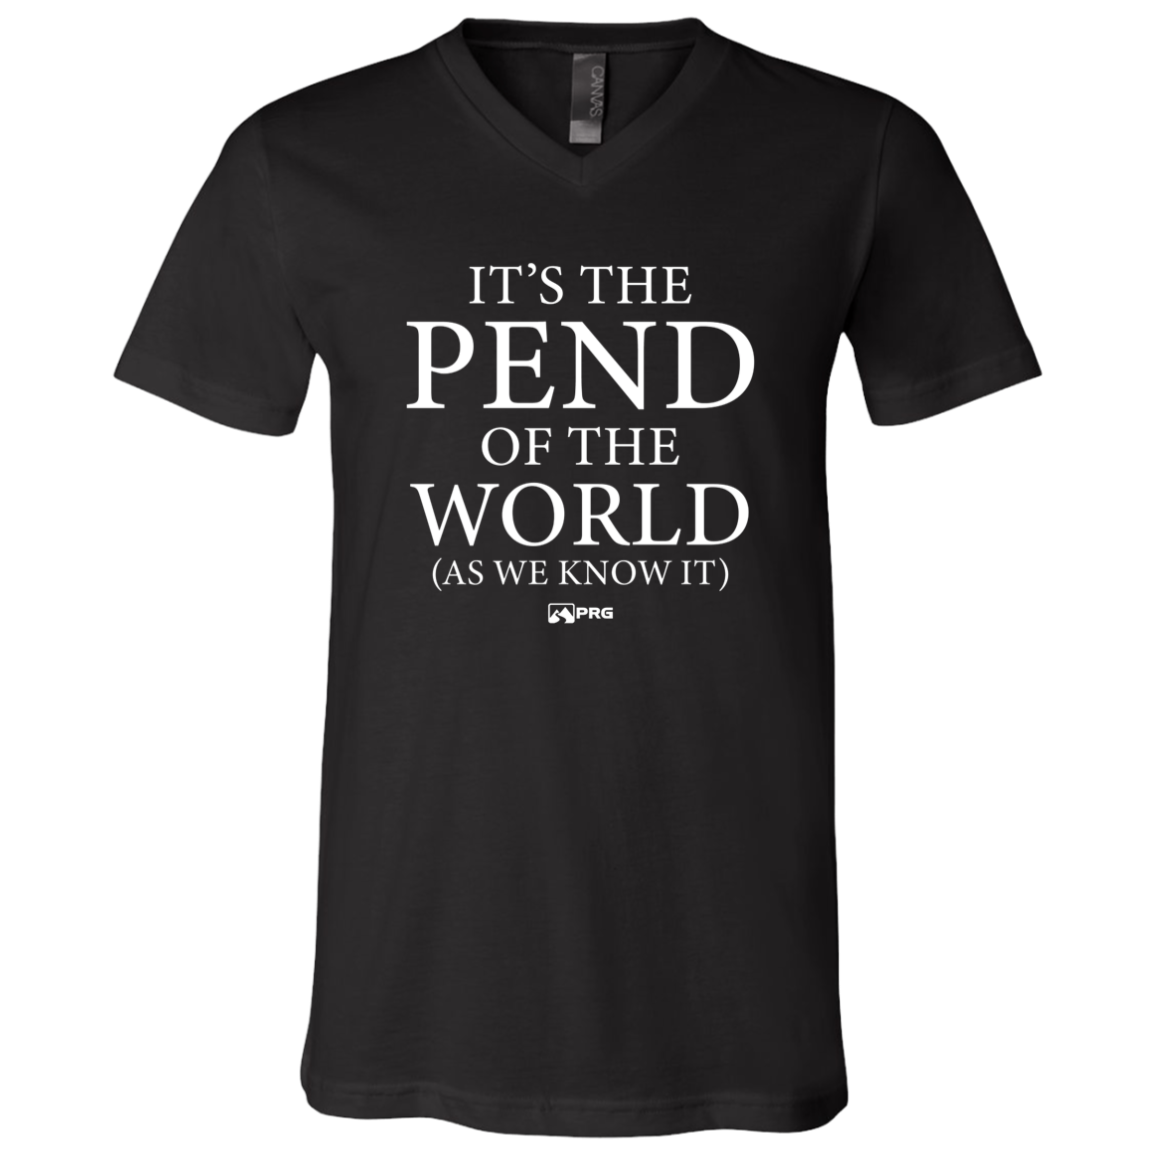 Pend of the World - V-Neck